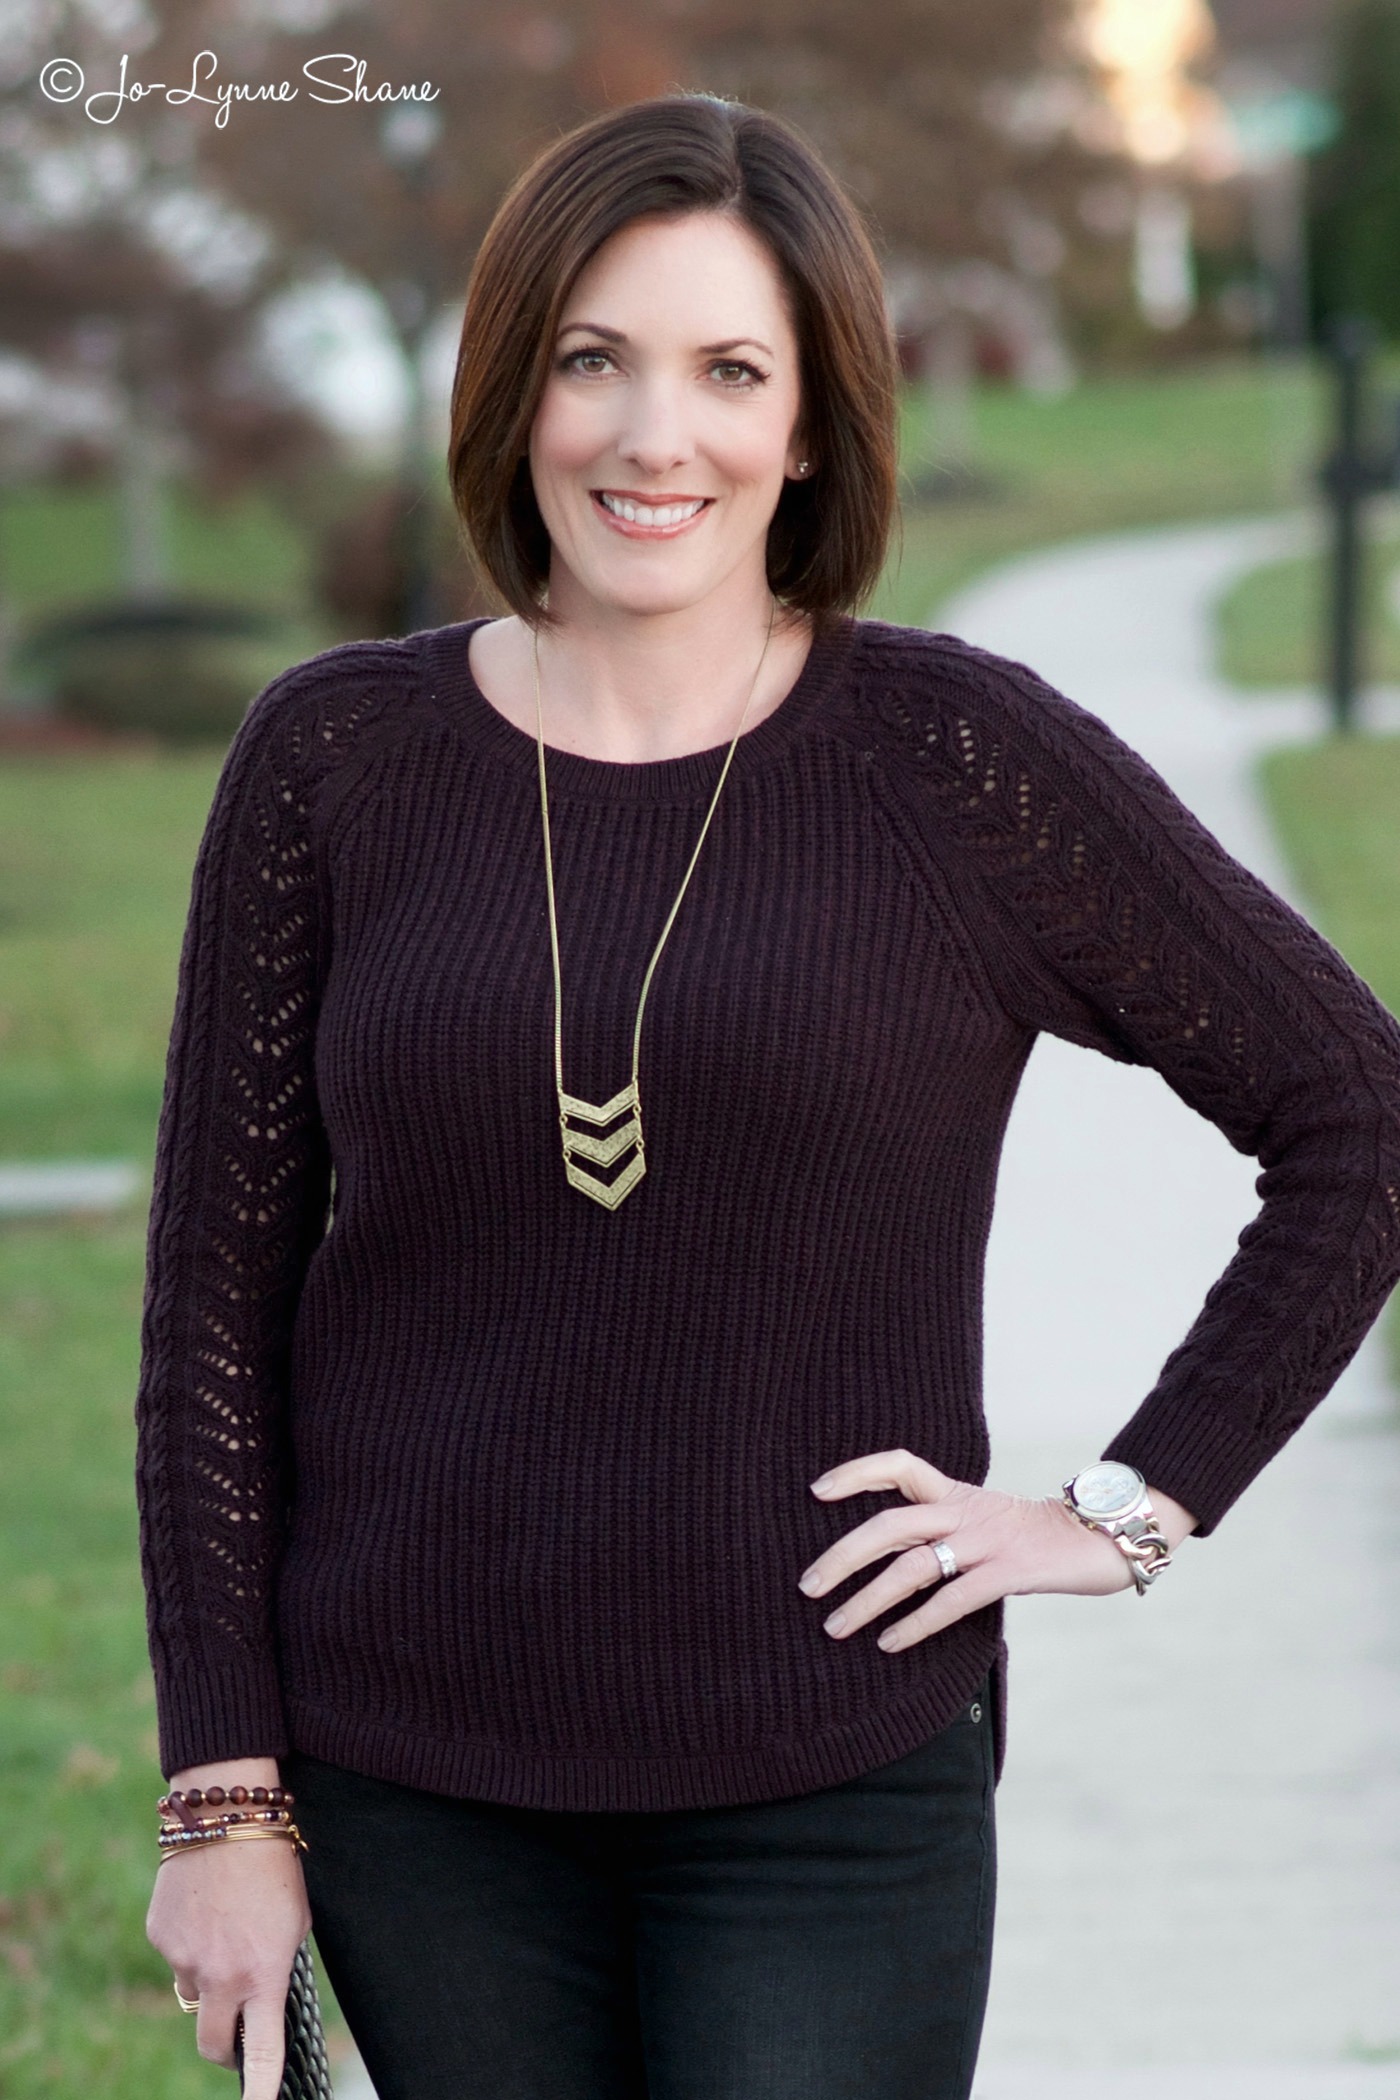 Fashion Over 40: Cable Sleeve Sweater + Black Jeans